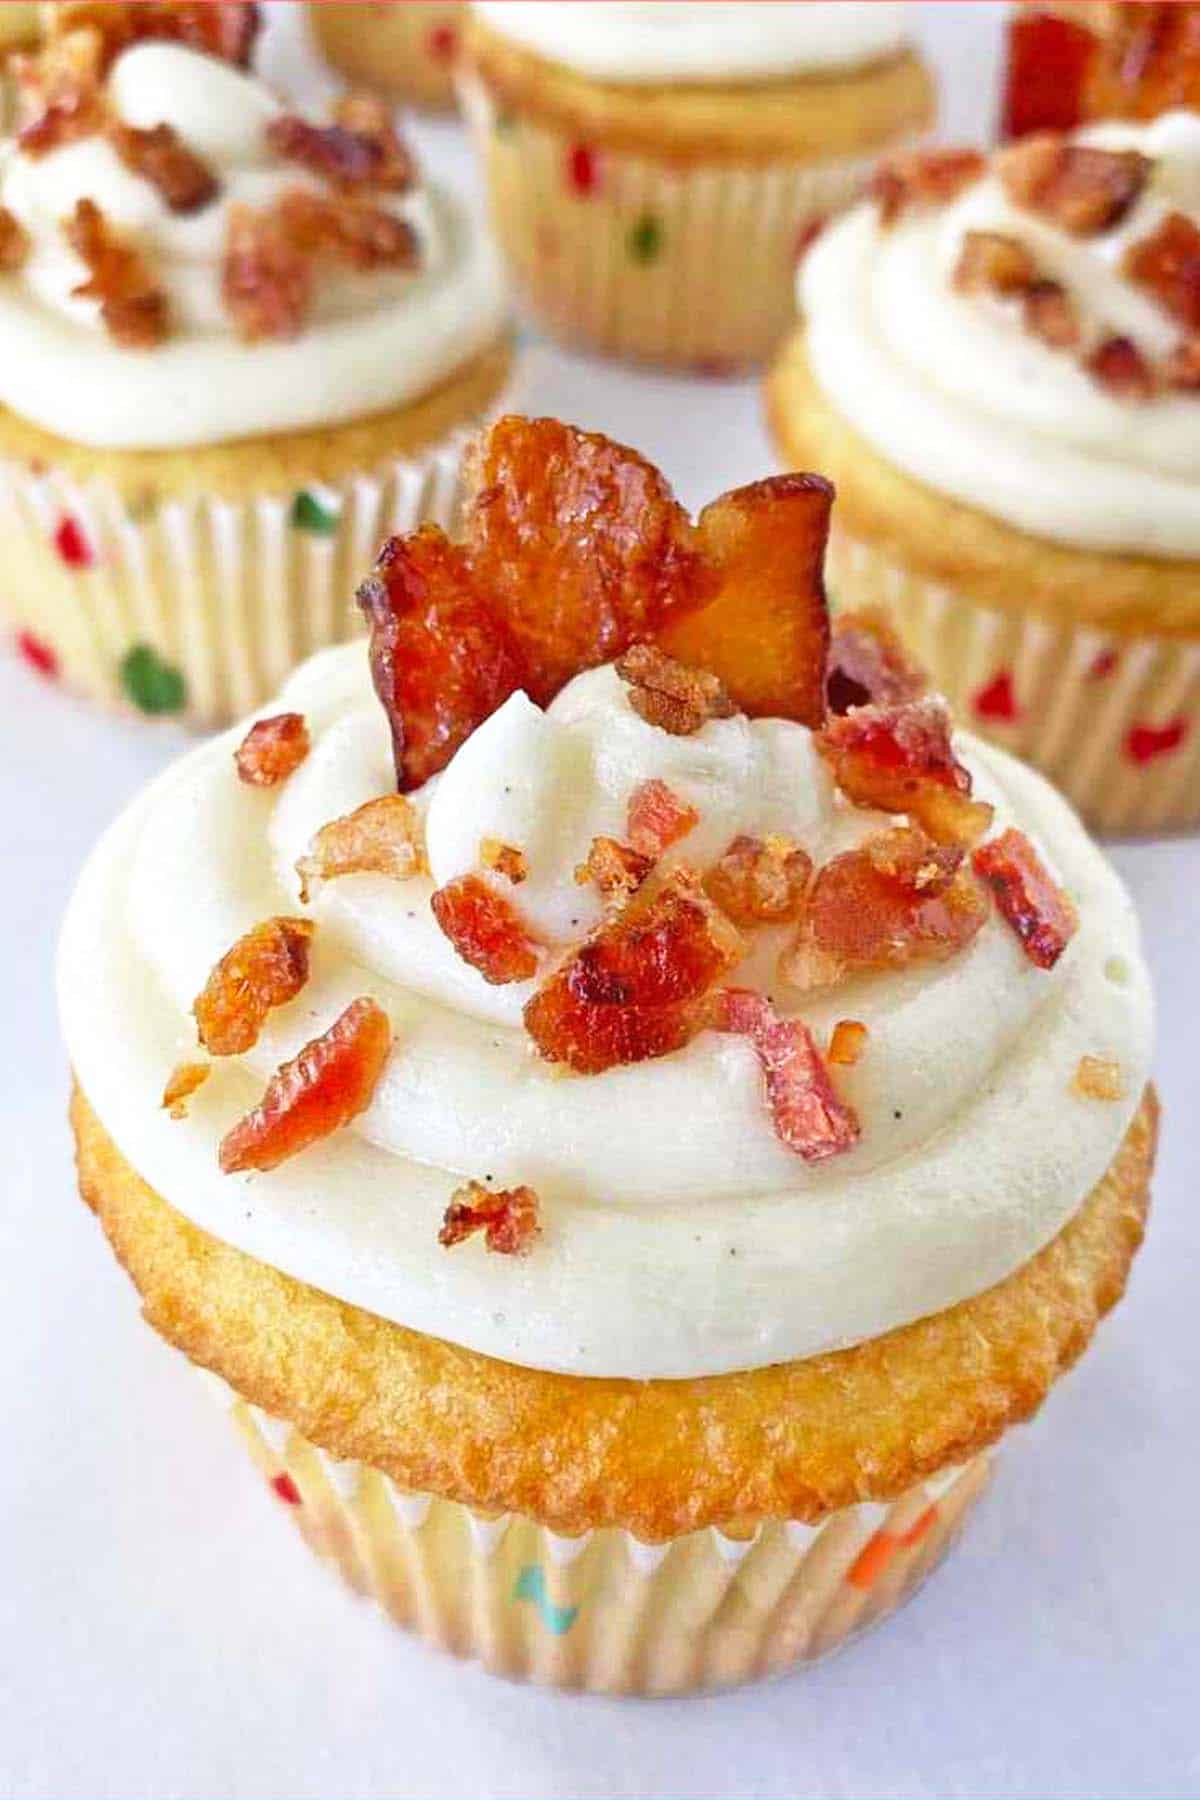 Finished maple bacon cupcakes ready to serve and eat.